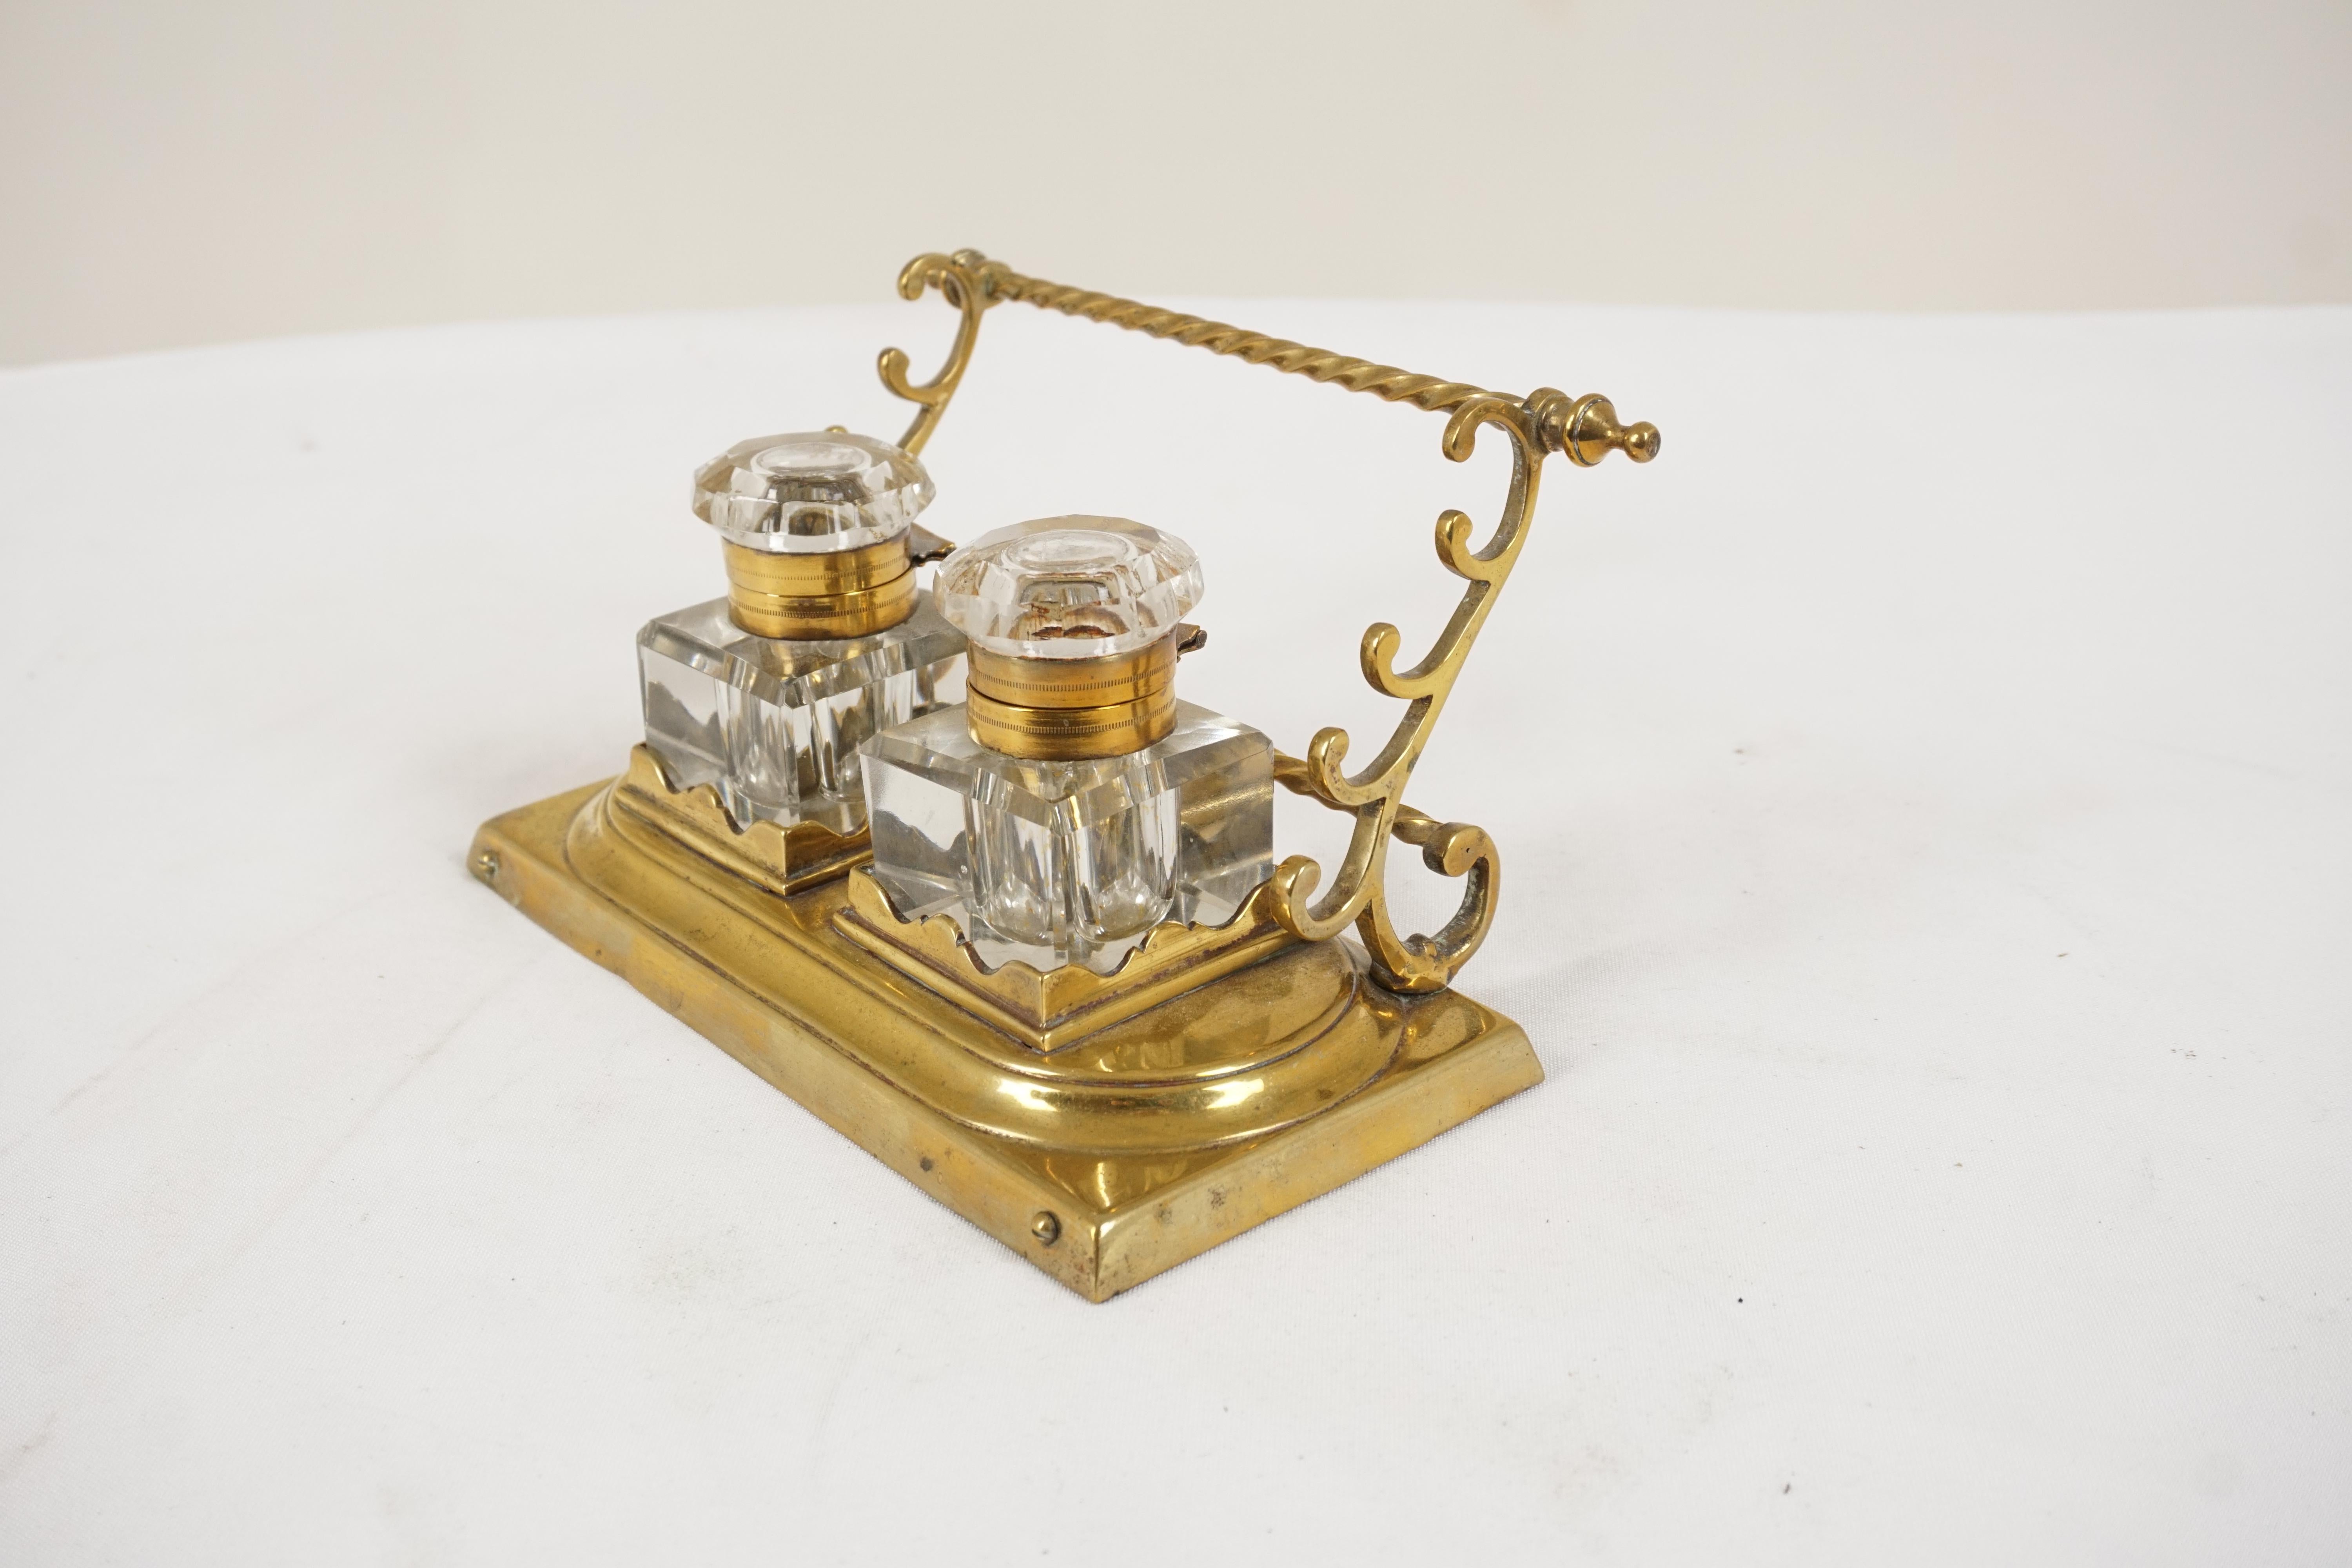 Hand-Crafted Antique Brass Double Inkstand with Pen Holders, Scotland 1900, H548 For Sale